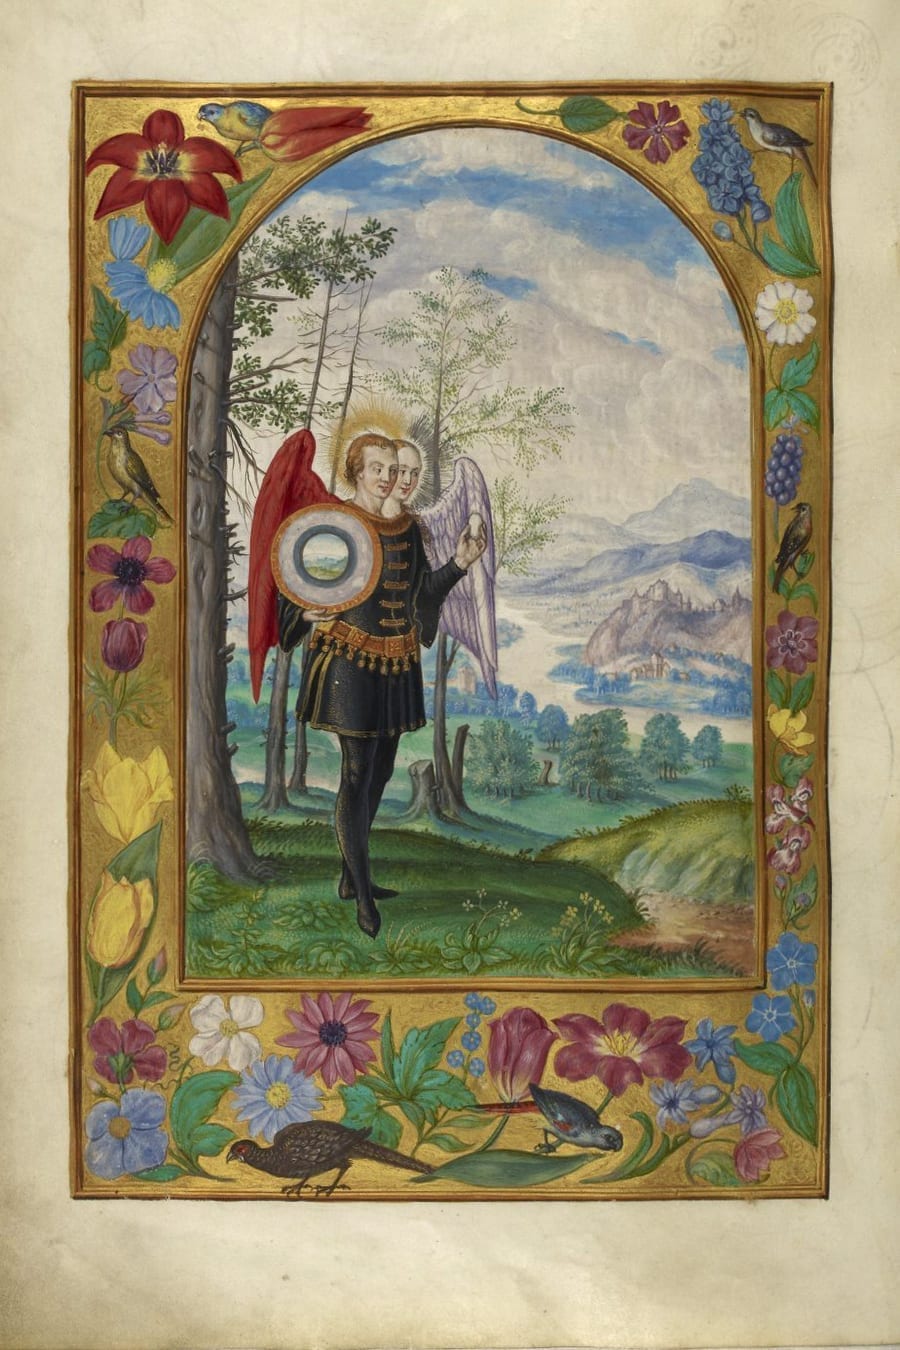 Illustration of two-headed winged figure from the Alchemical manuscript Splendor Solis